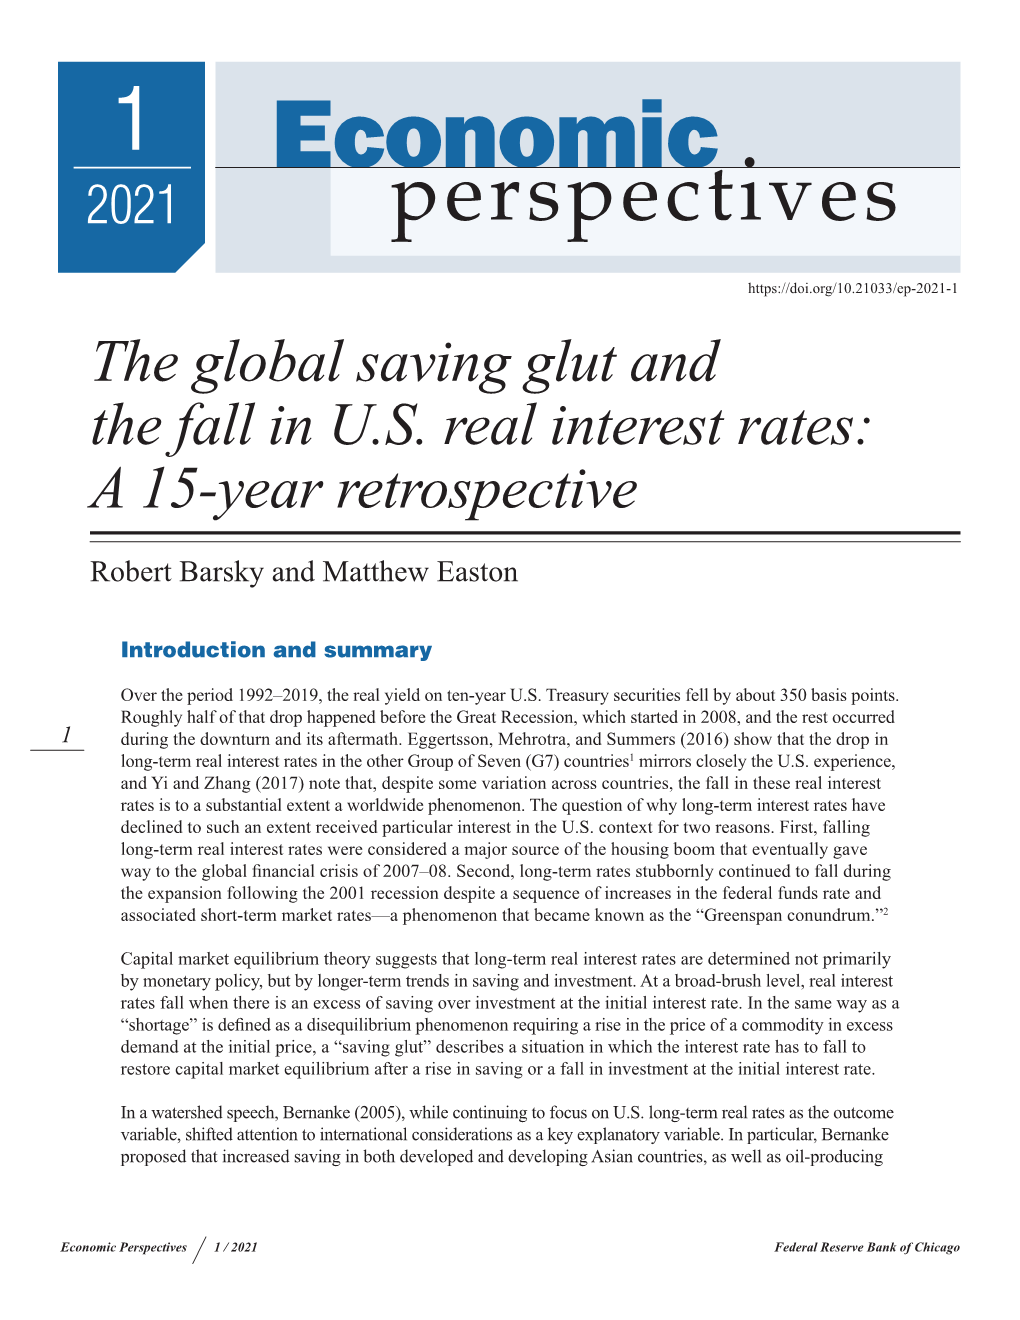 The Global Saving Glut and the Fall in U.S